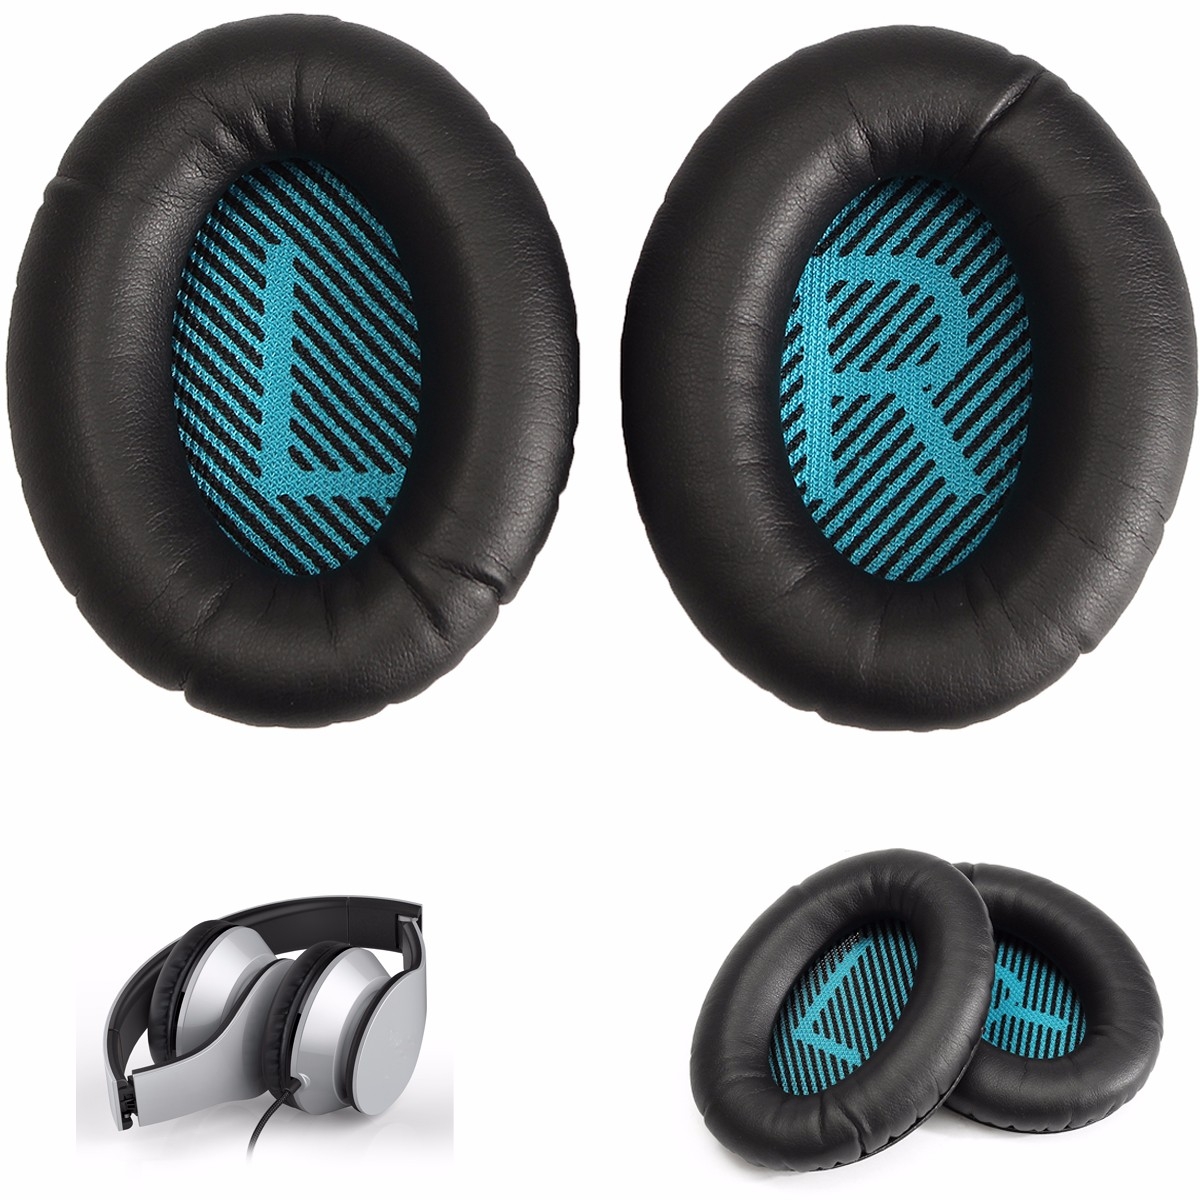 2 Pairs Replacement Headphone Ear Cushion Earpads Cover For Boses QC25